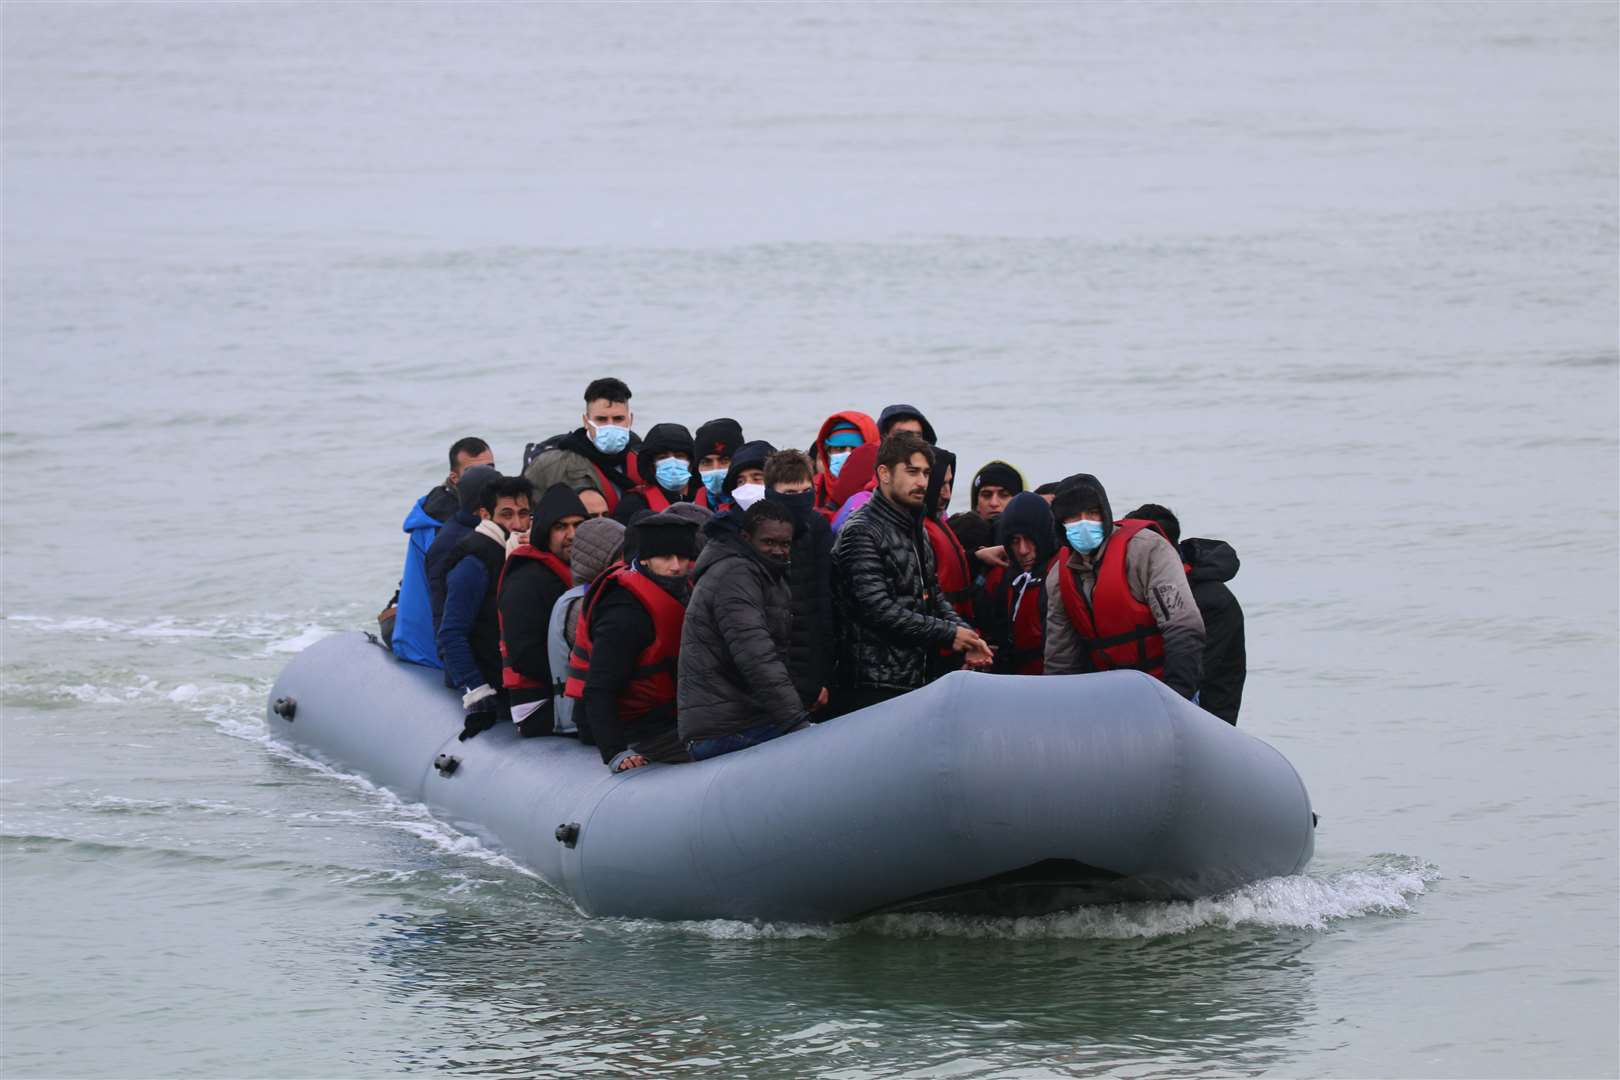 Almost 1,000 migrants crossed the English Channel in 24 small boats on Saturday, the Ministry of Defence says